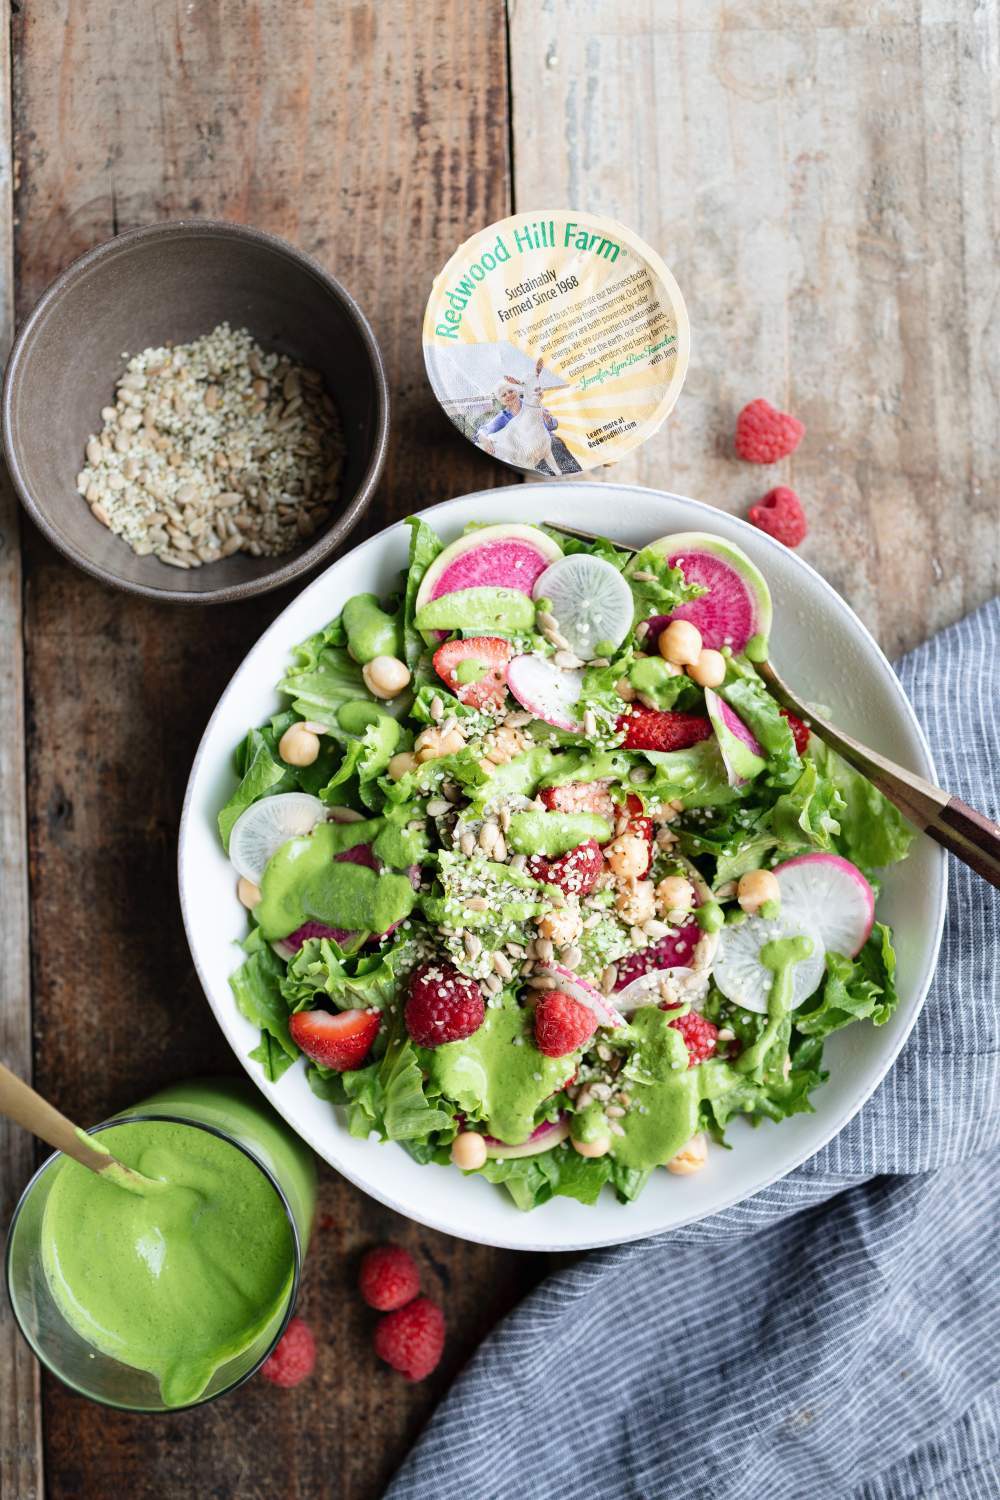 Spring into Easter with this Green Goddess Salad Recipe from Little Saint